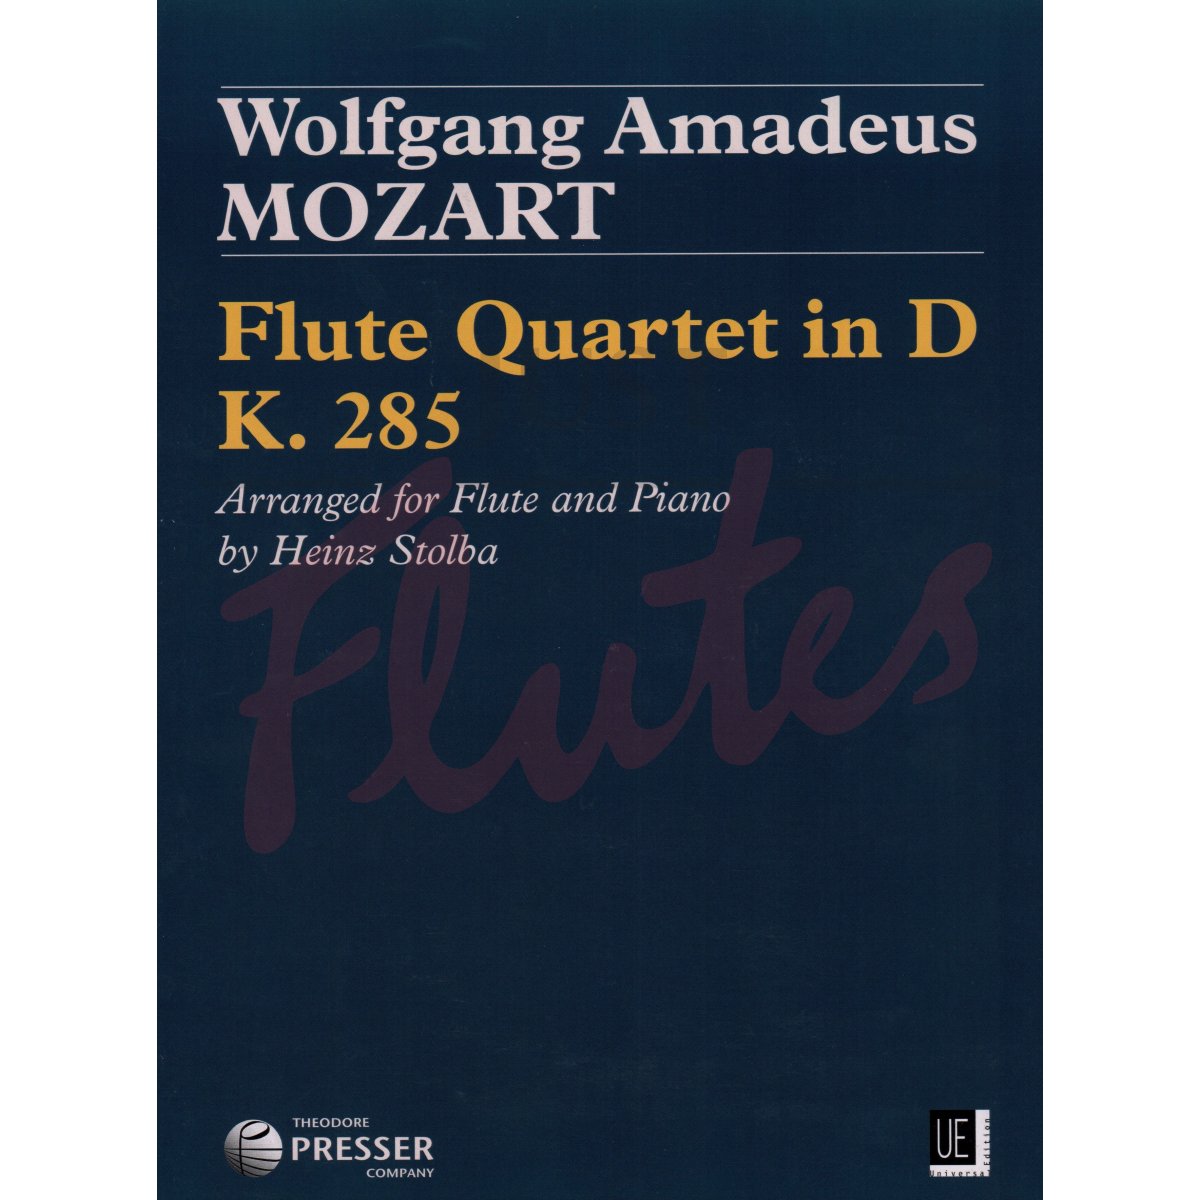 Flute Quartet in D for Flute and Piano